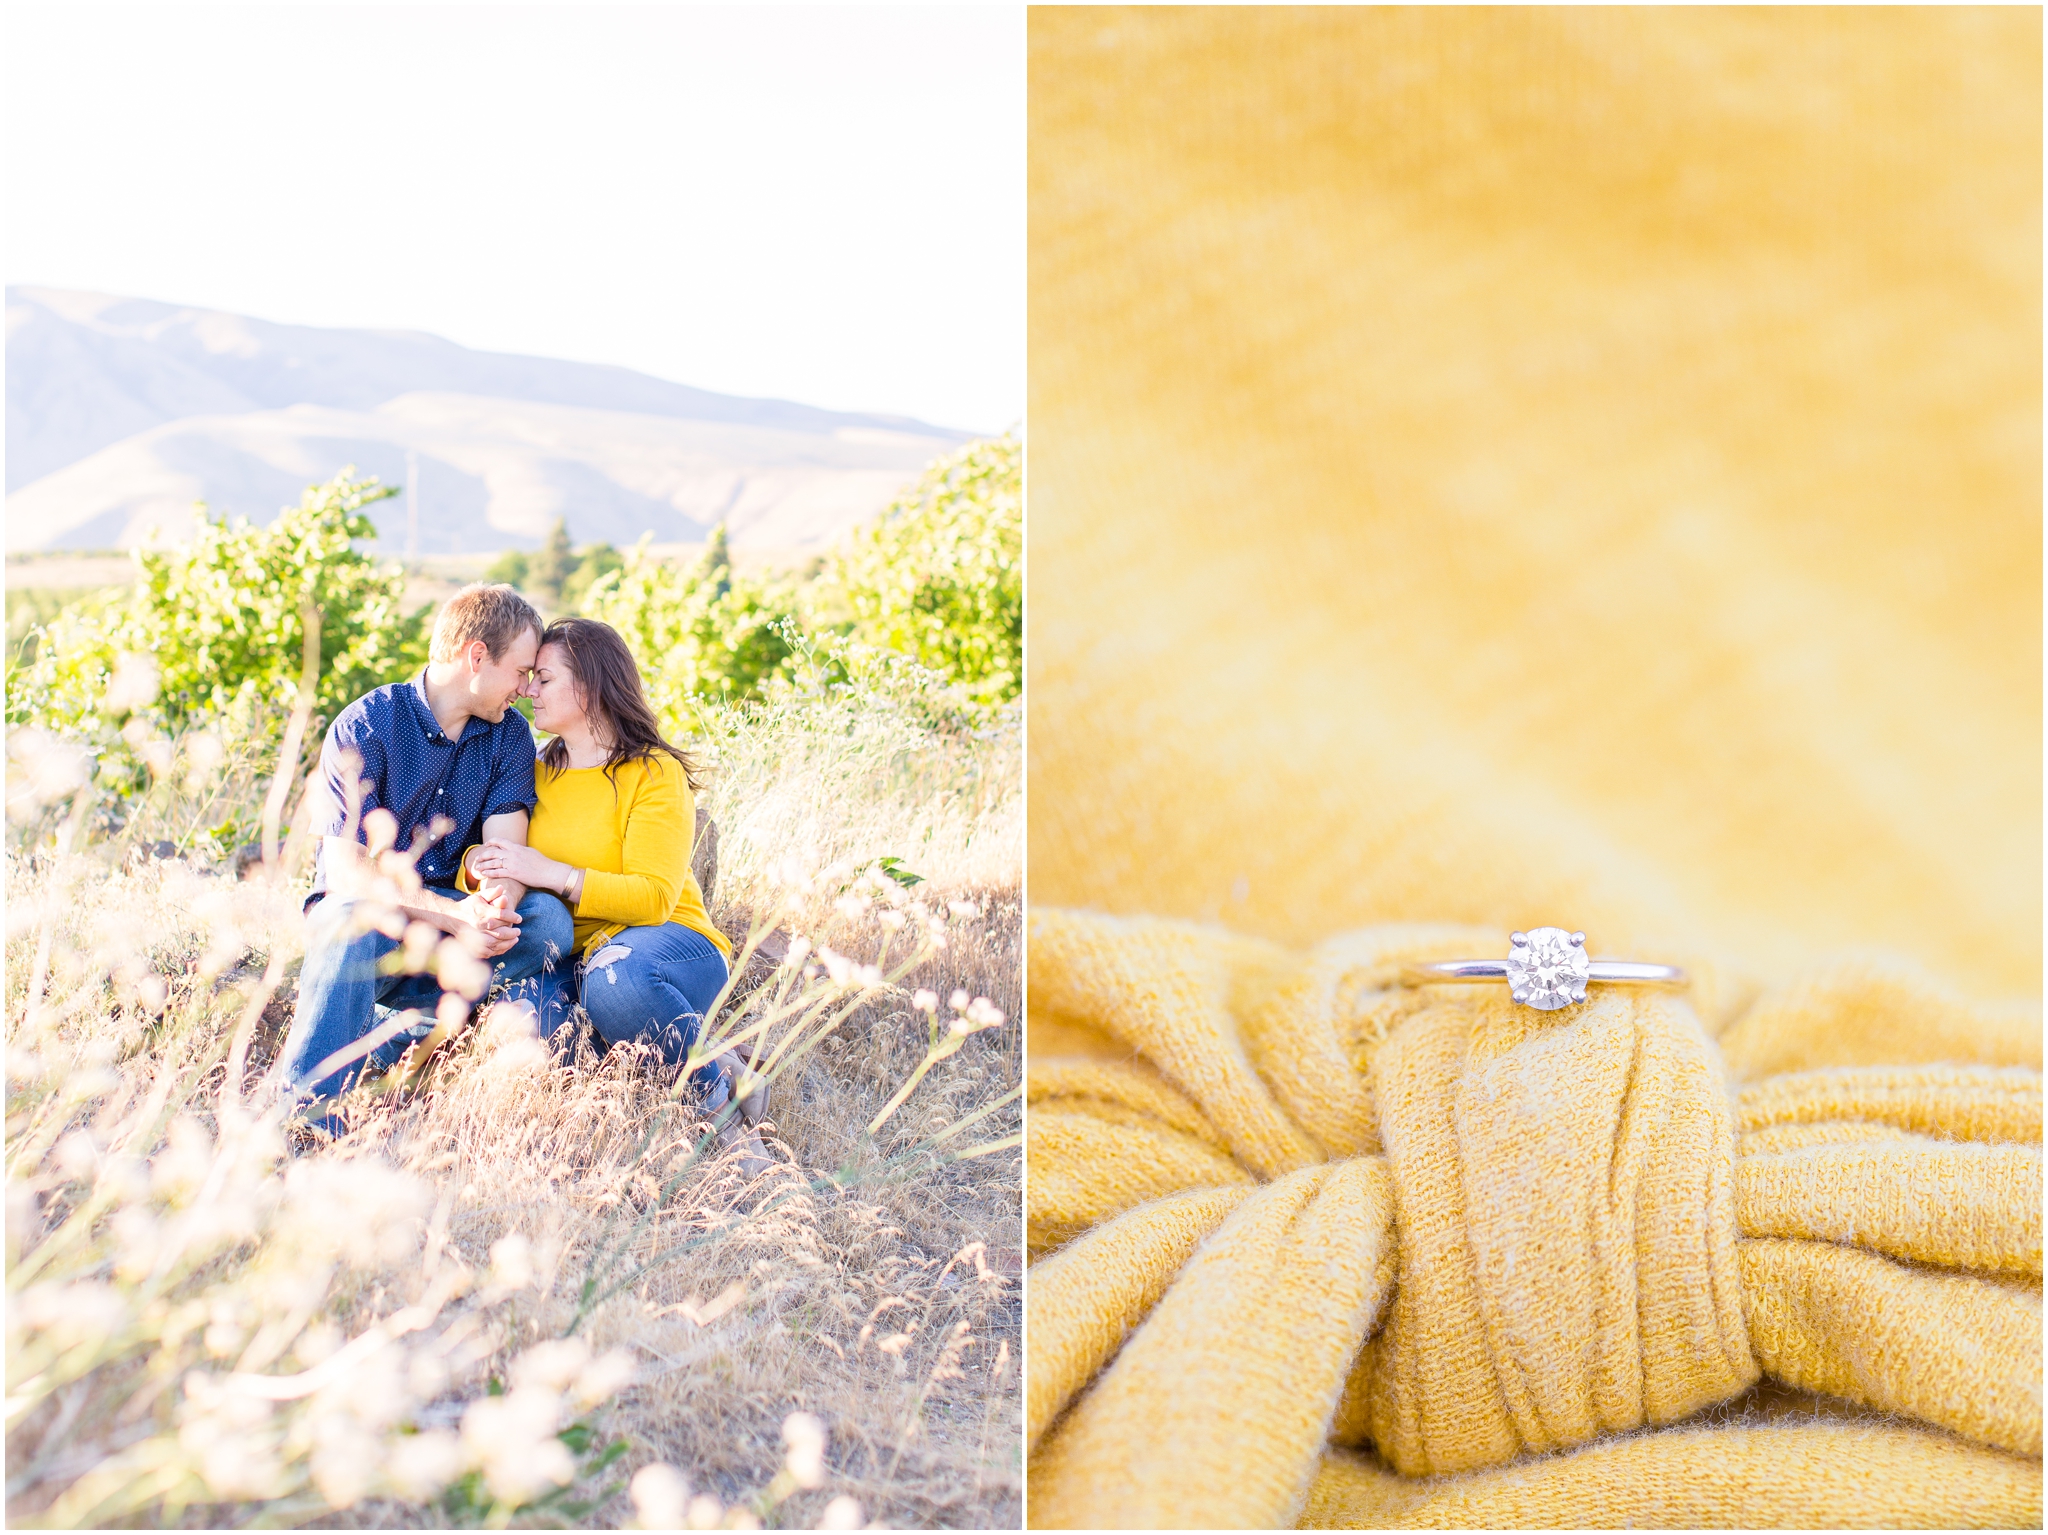 This Yakima engagement session was captured by Spokane wedding photographer in town for a Fontaine Estates Winery wedding. Liz and Kevin will be having a fall American Homestead wedding captured by Yakima wedding photographer Taylor Rose Photography.